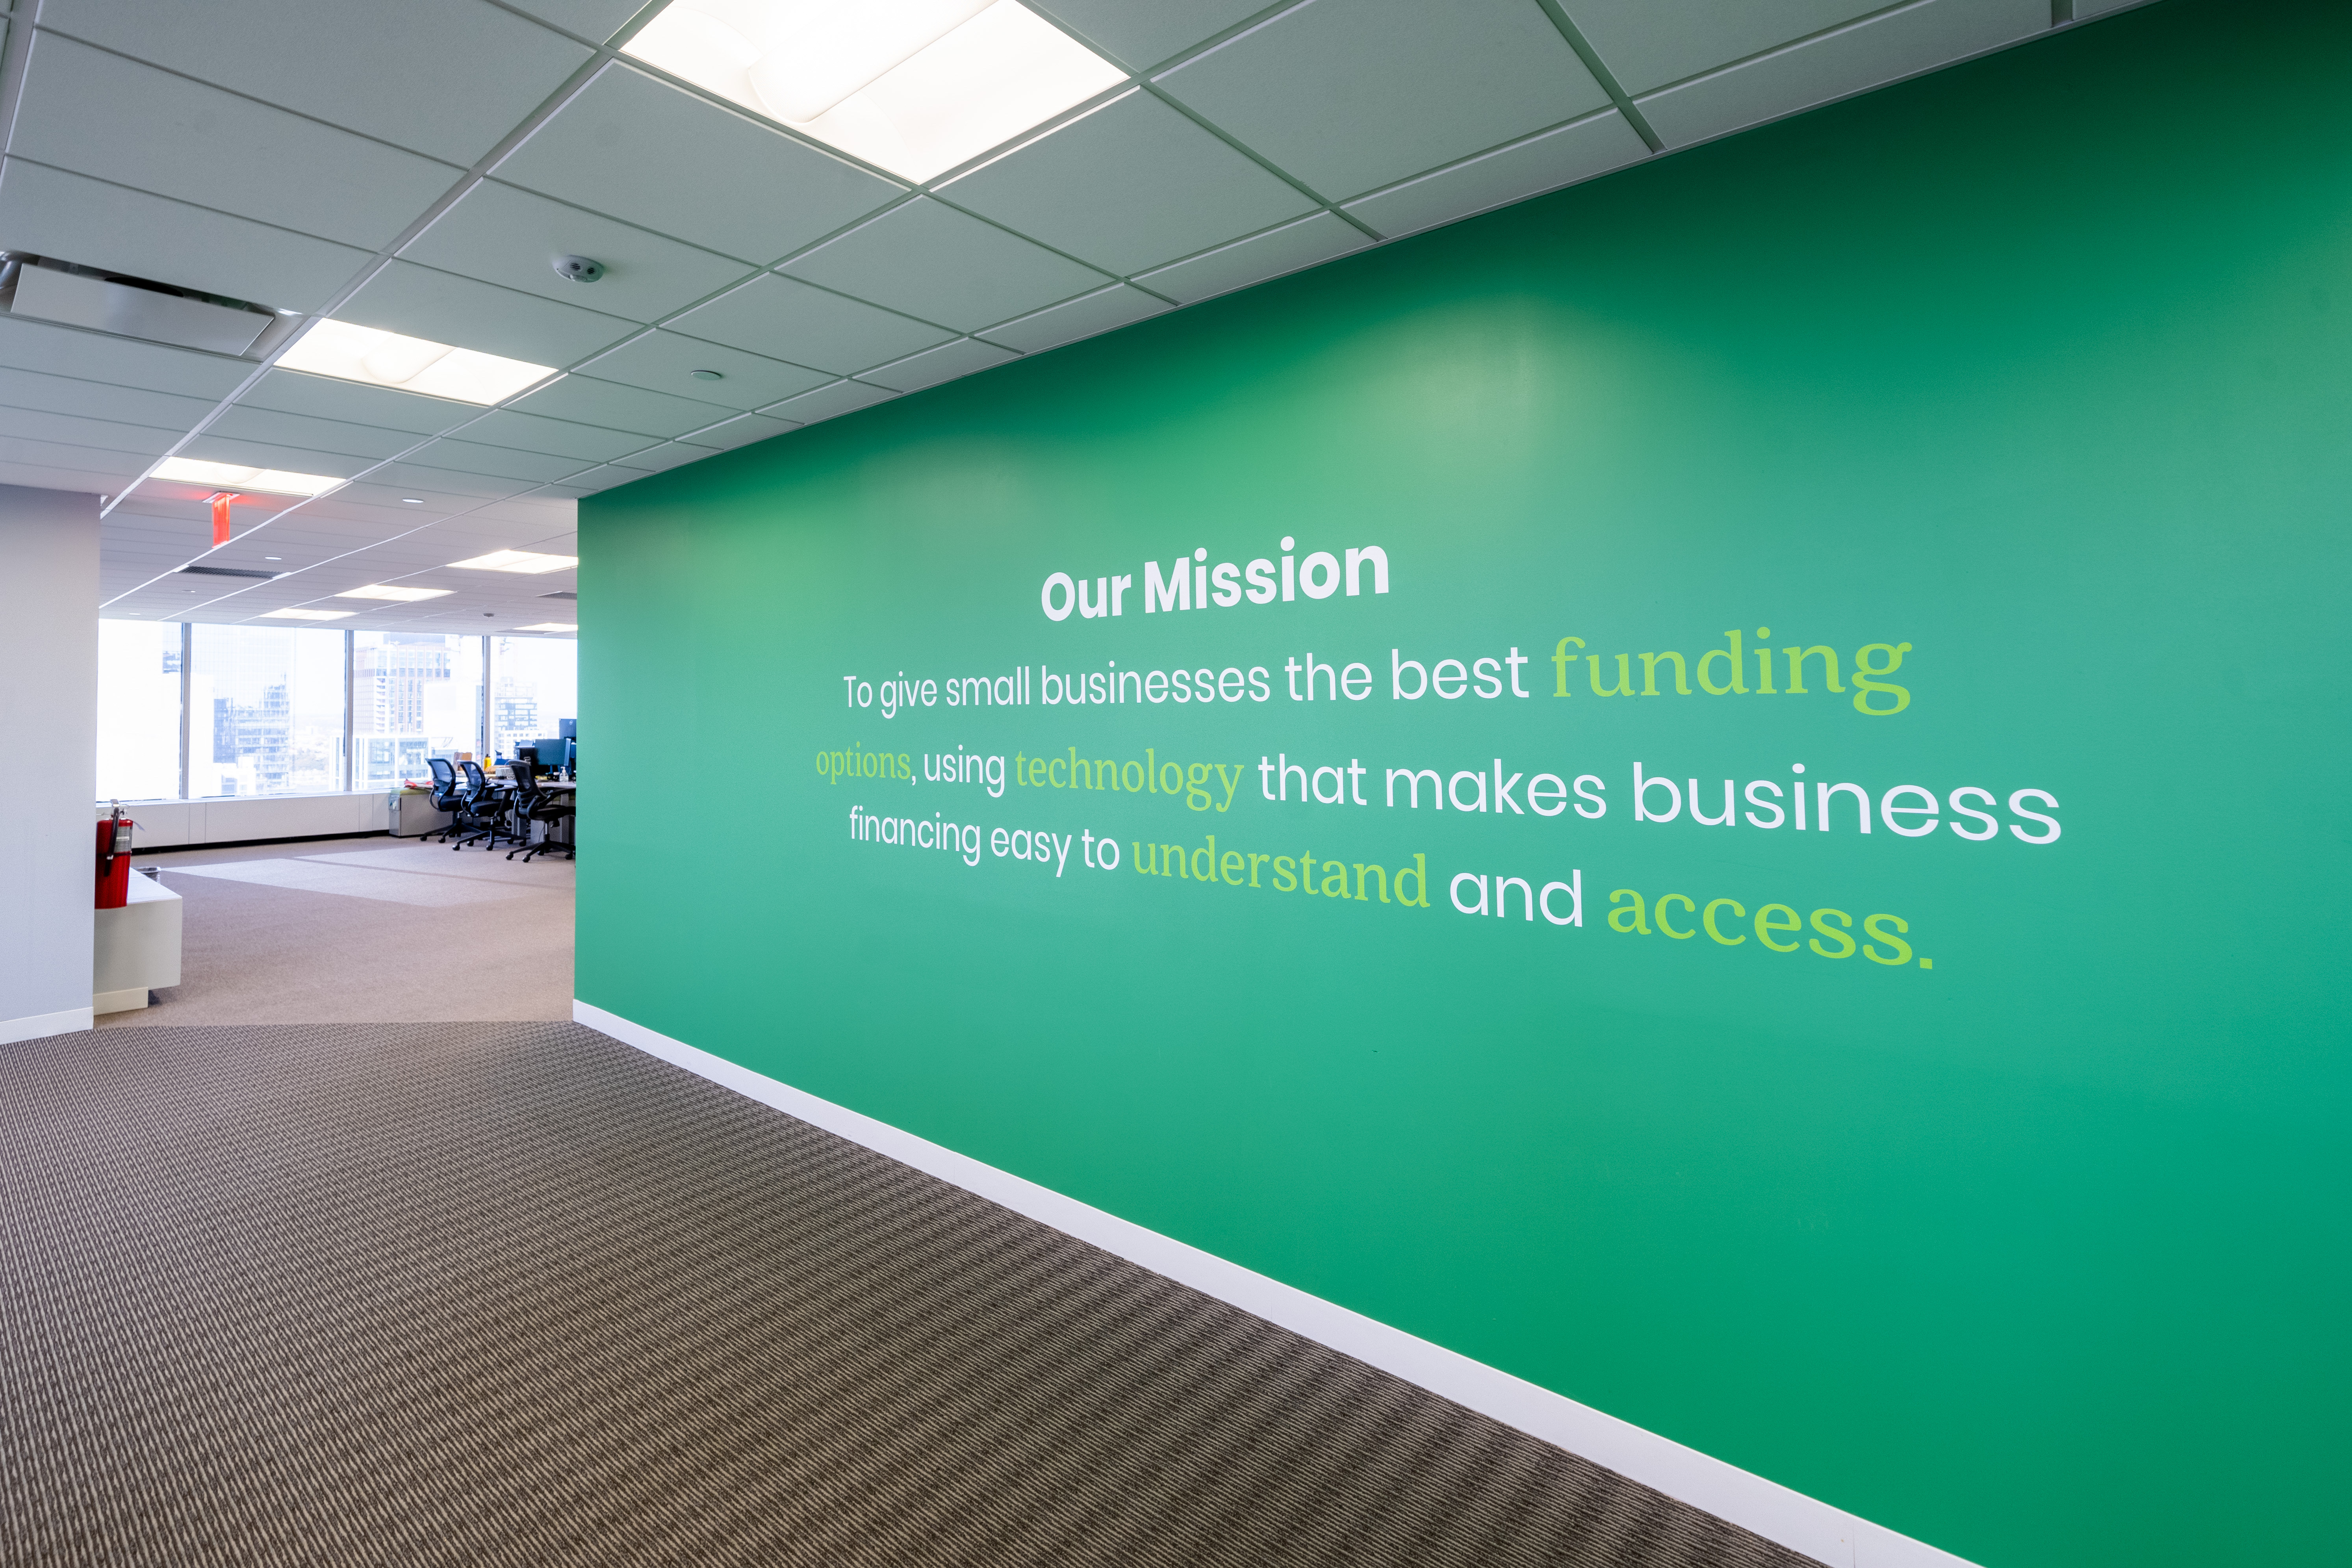 Biz2Credit’s mission statement on a green wall in its office